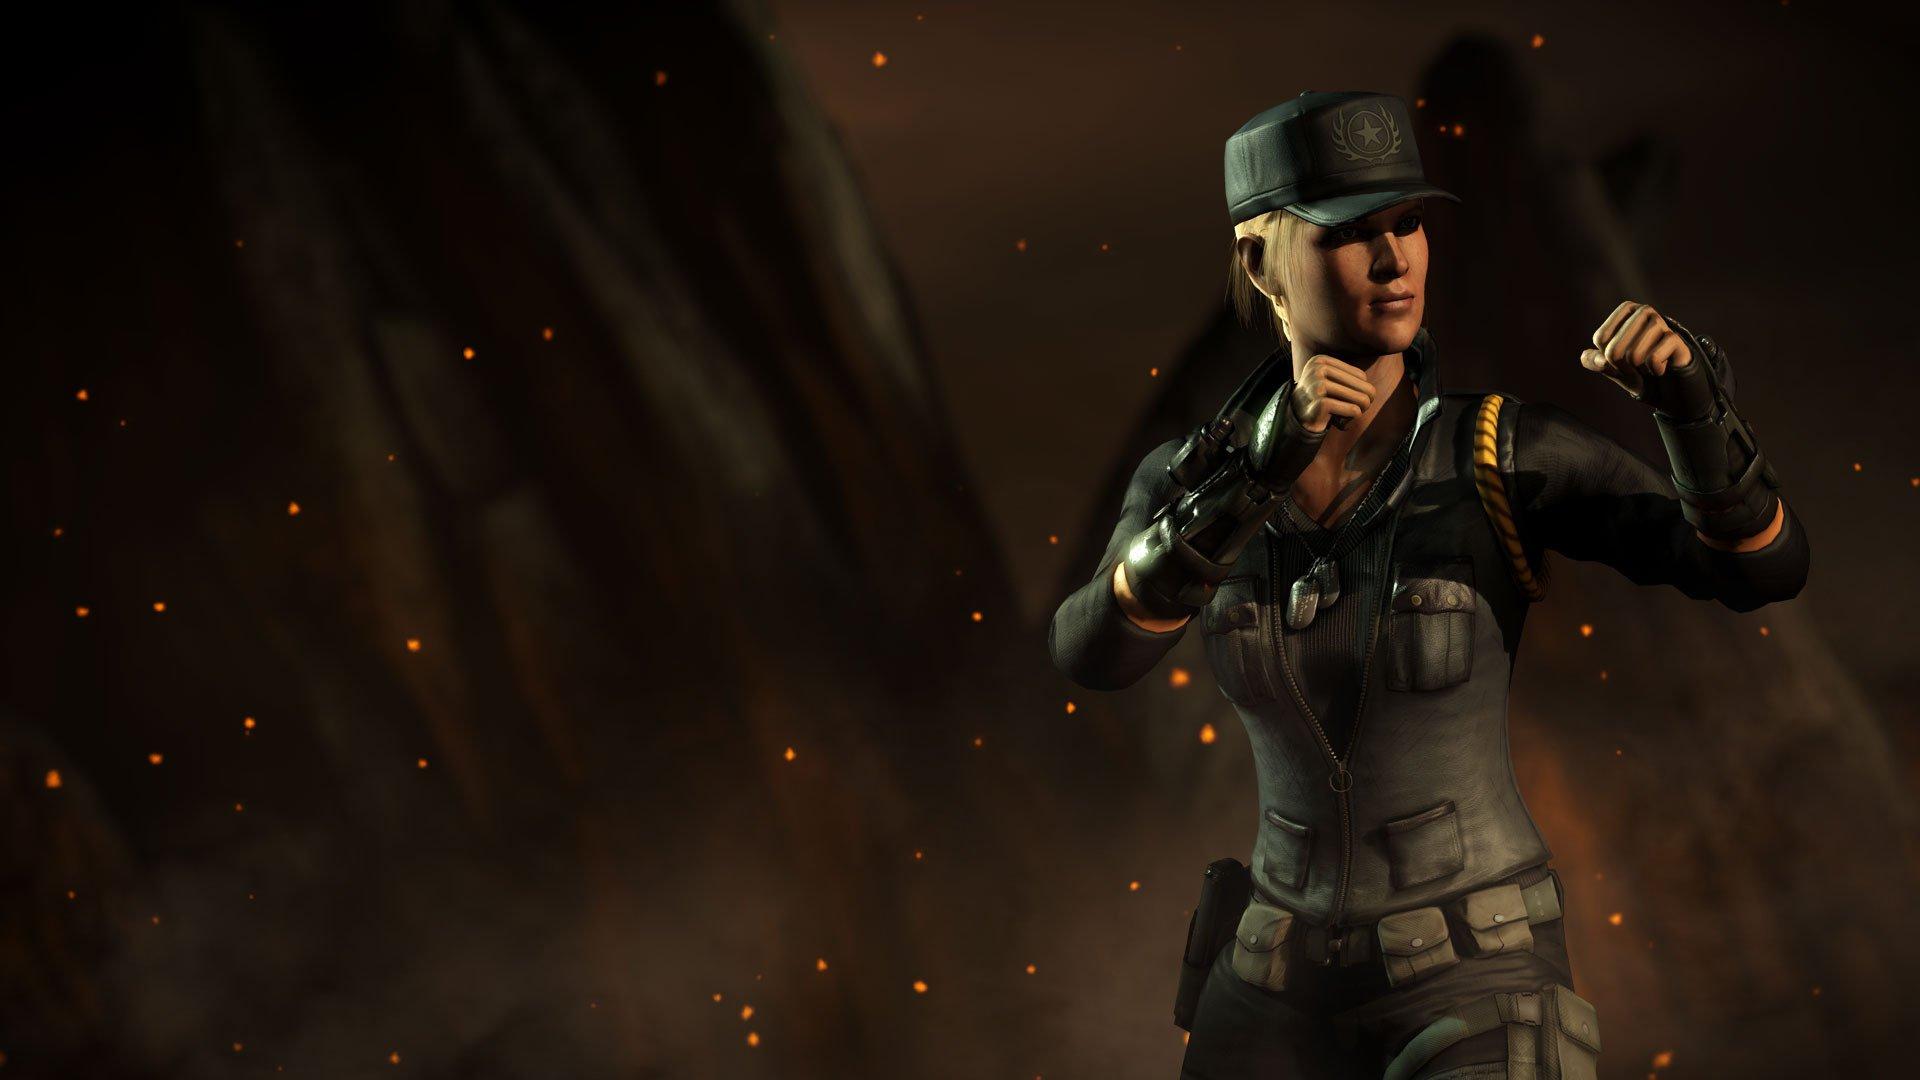 Hot Picture Of Sonya Blade From Mortal Kombat